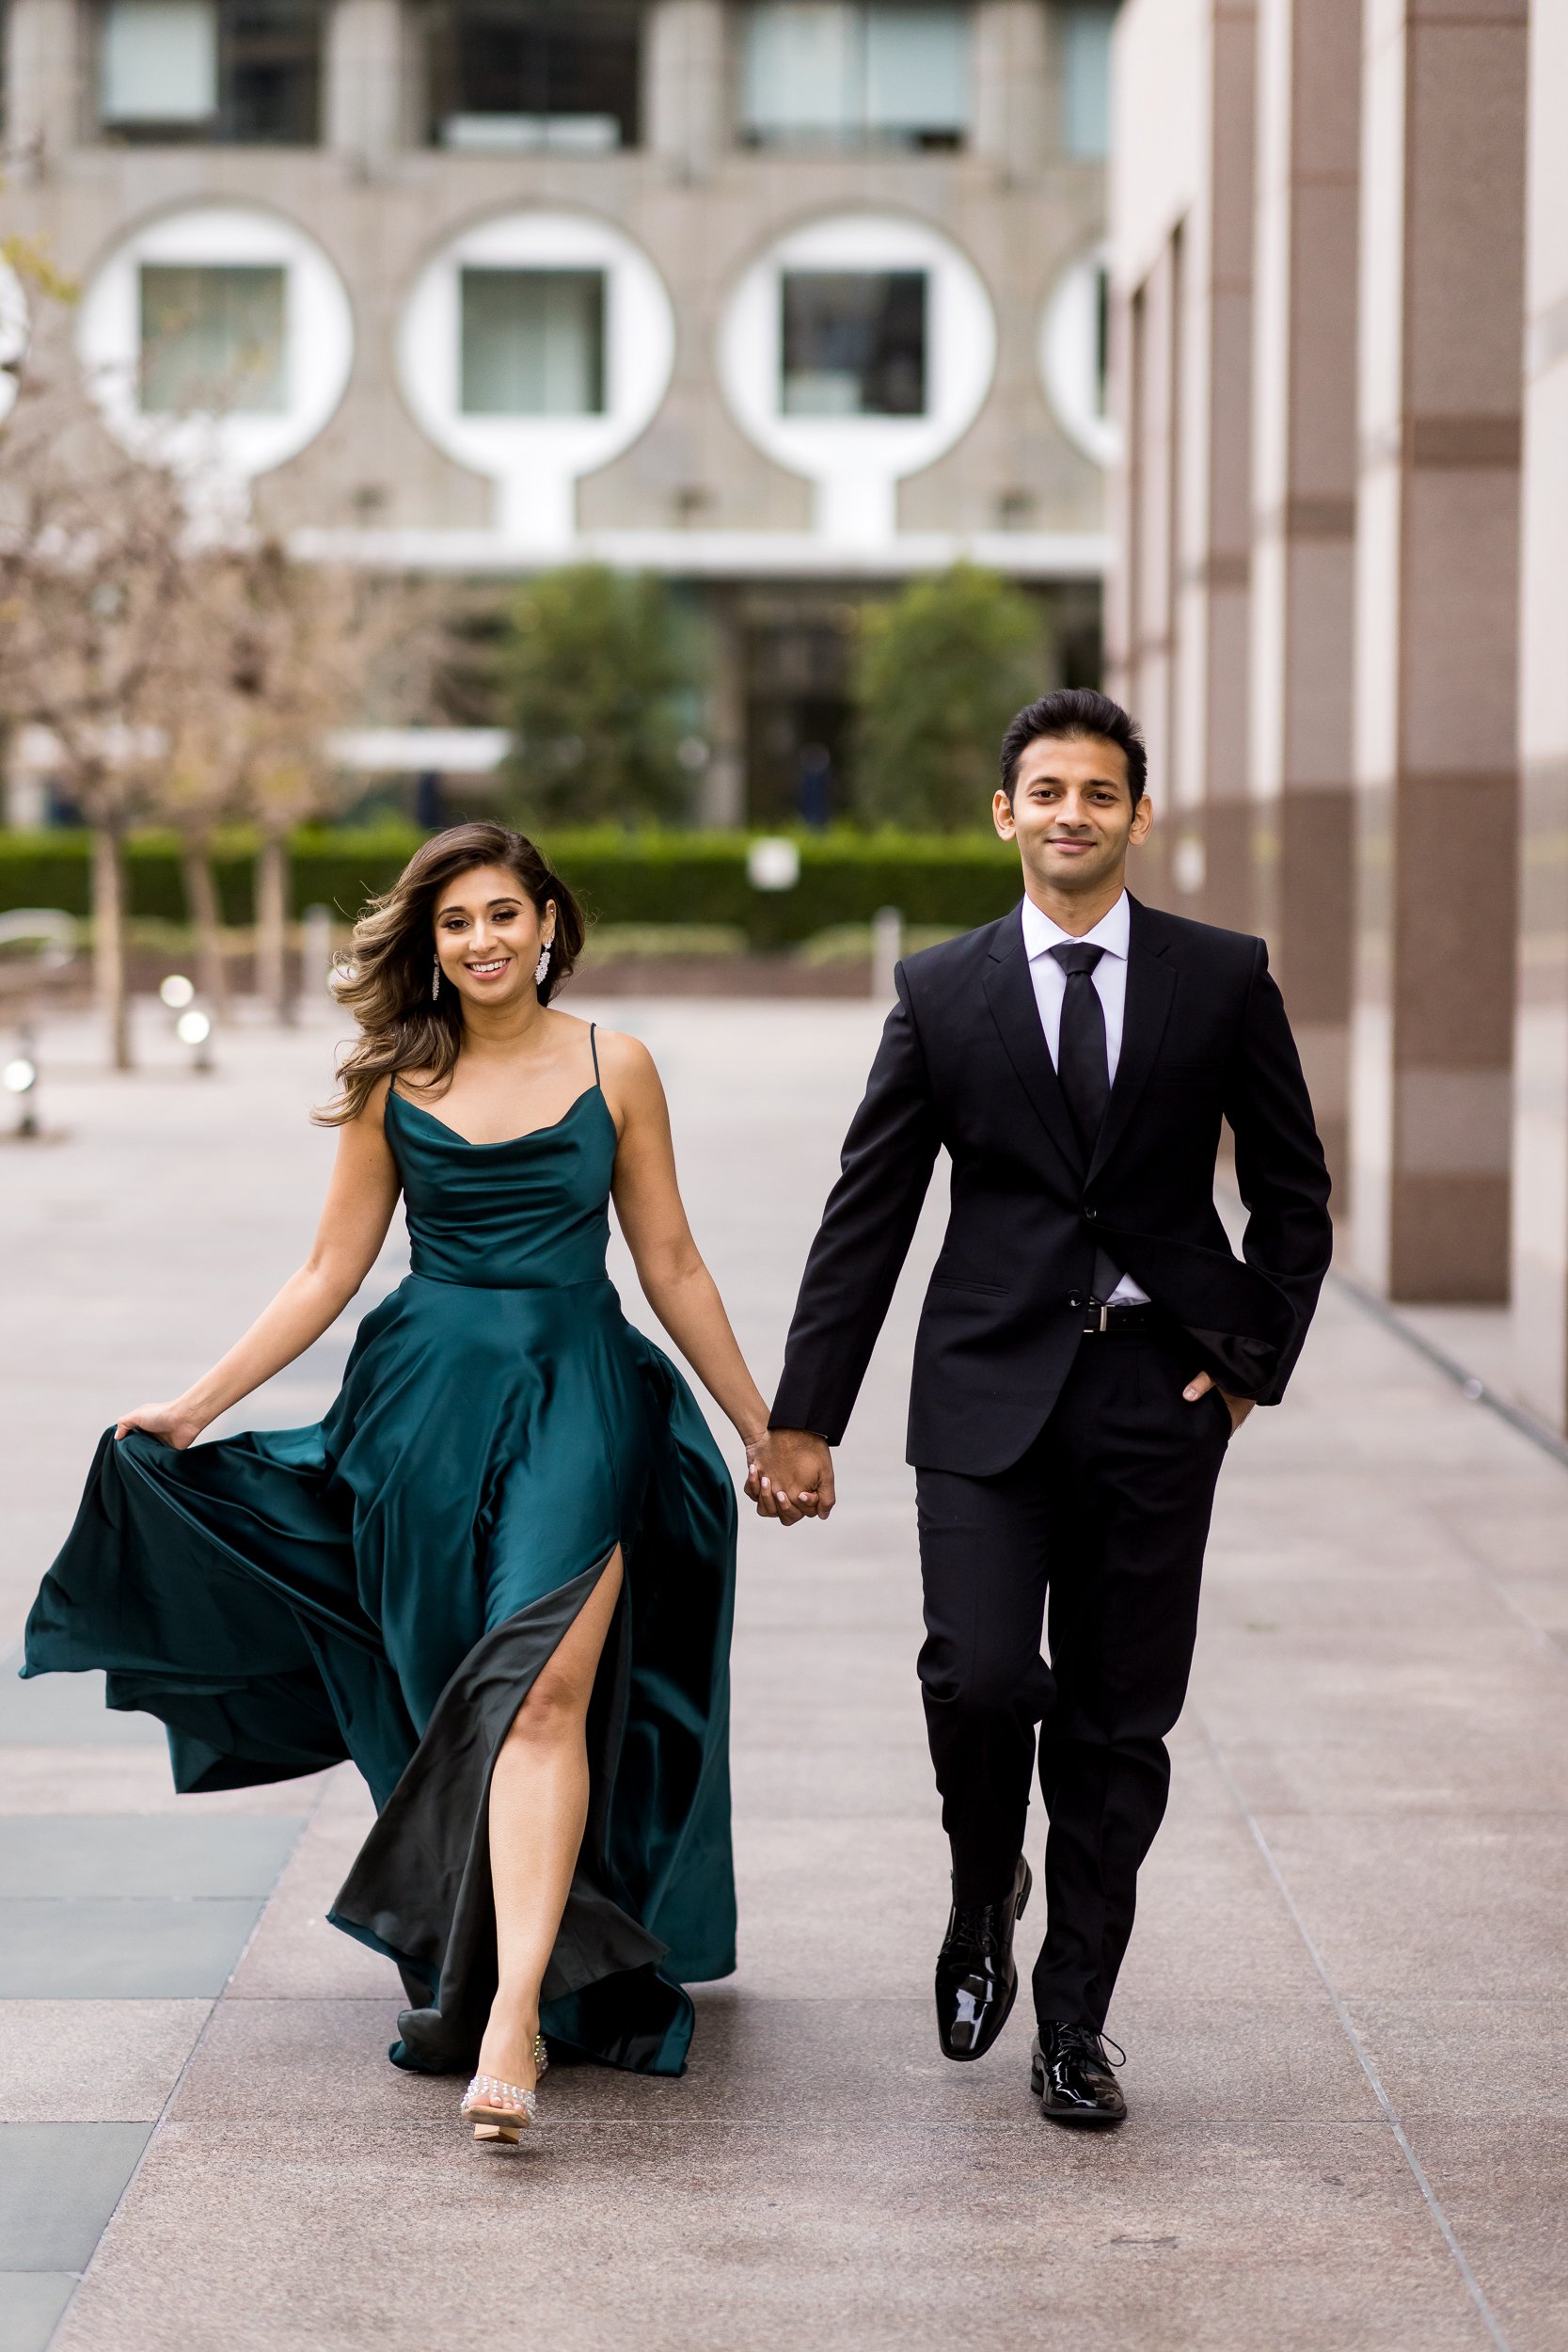 Downtown Los Angeles Engagement Photos-11.jpg